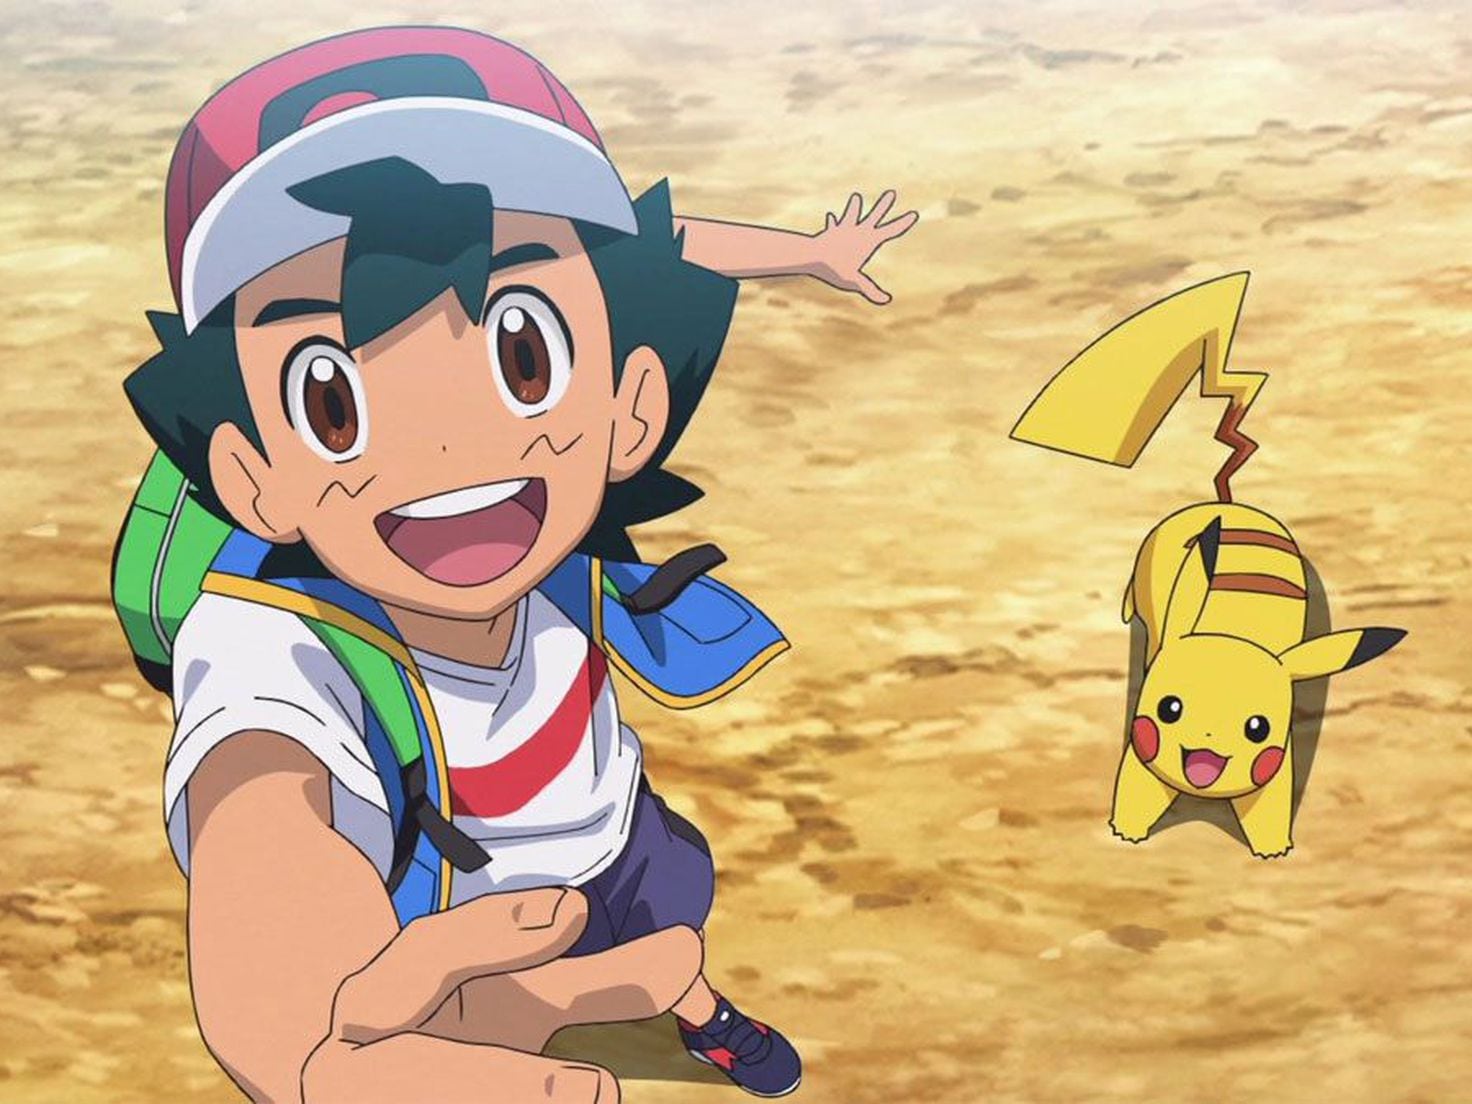 The end of an era: Ash and Pikachu's journey ends after 26 years